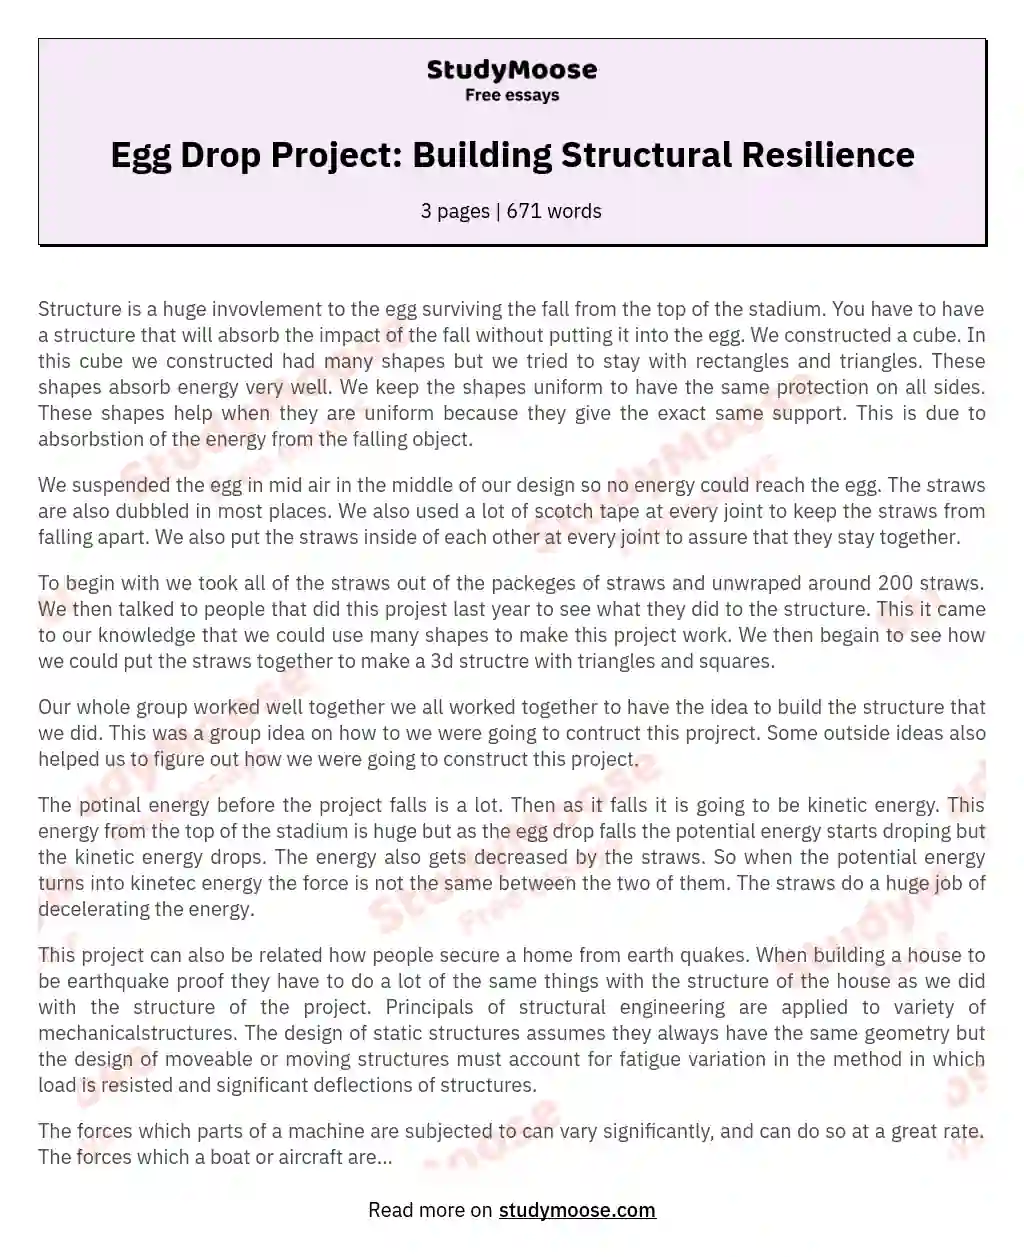 Egg Drop Project: Building Structural Resilience essay